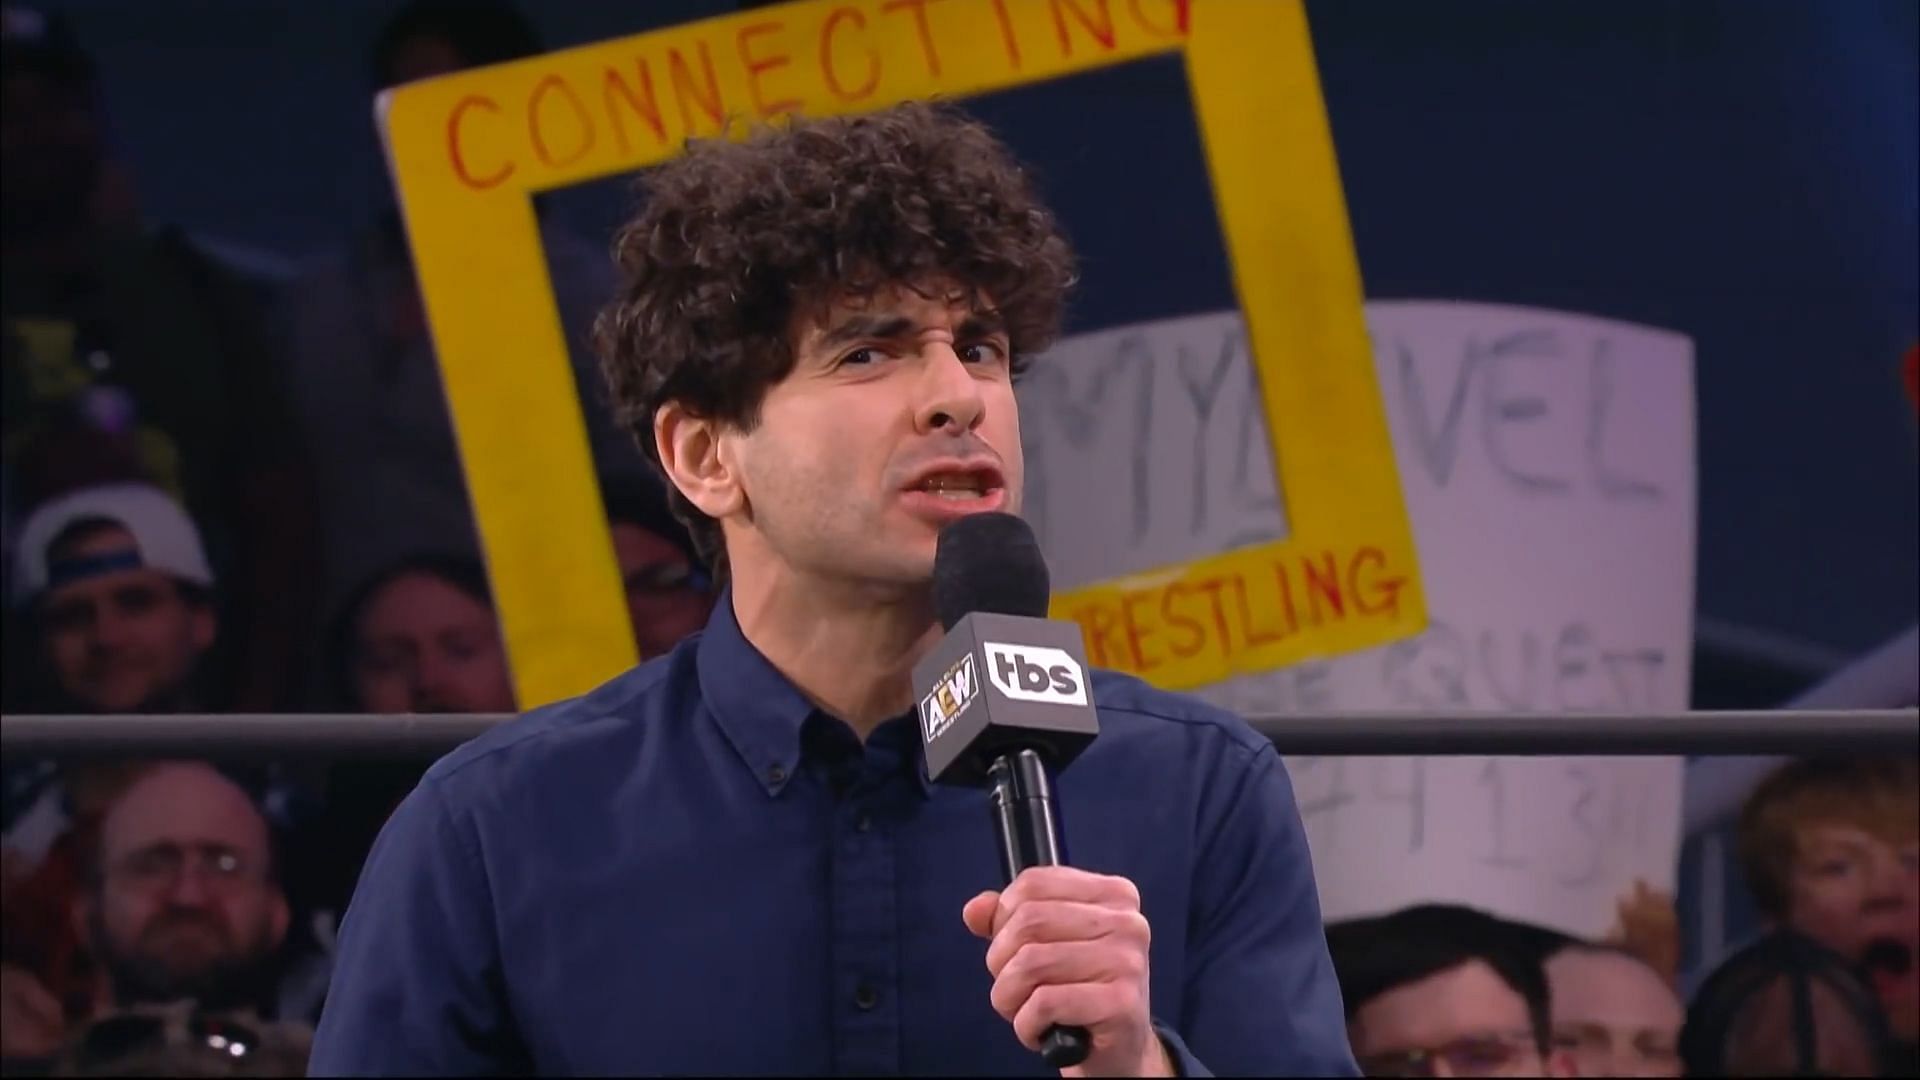 Tony Khan had some harsh words for the industry leader (image credit: All Elite Wrestling on YouTube)